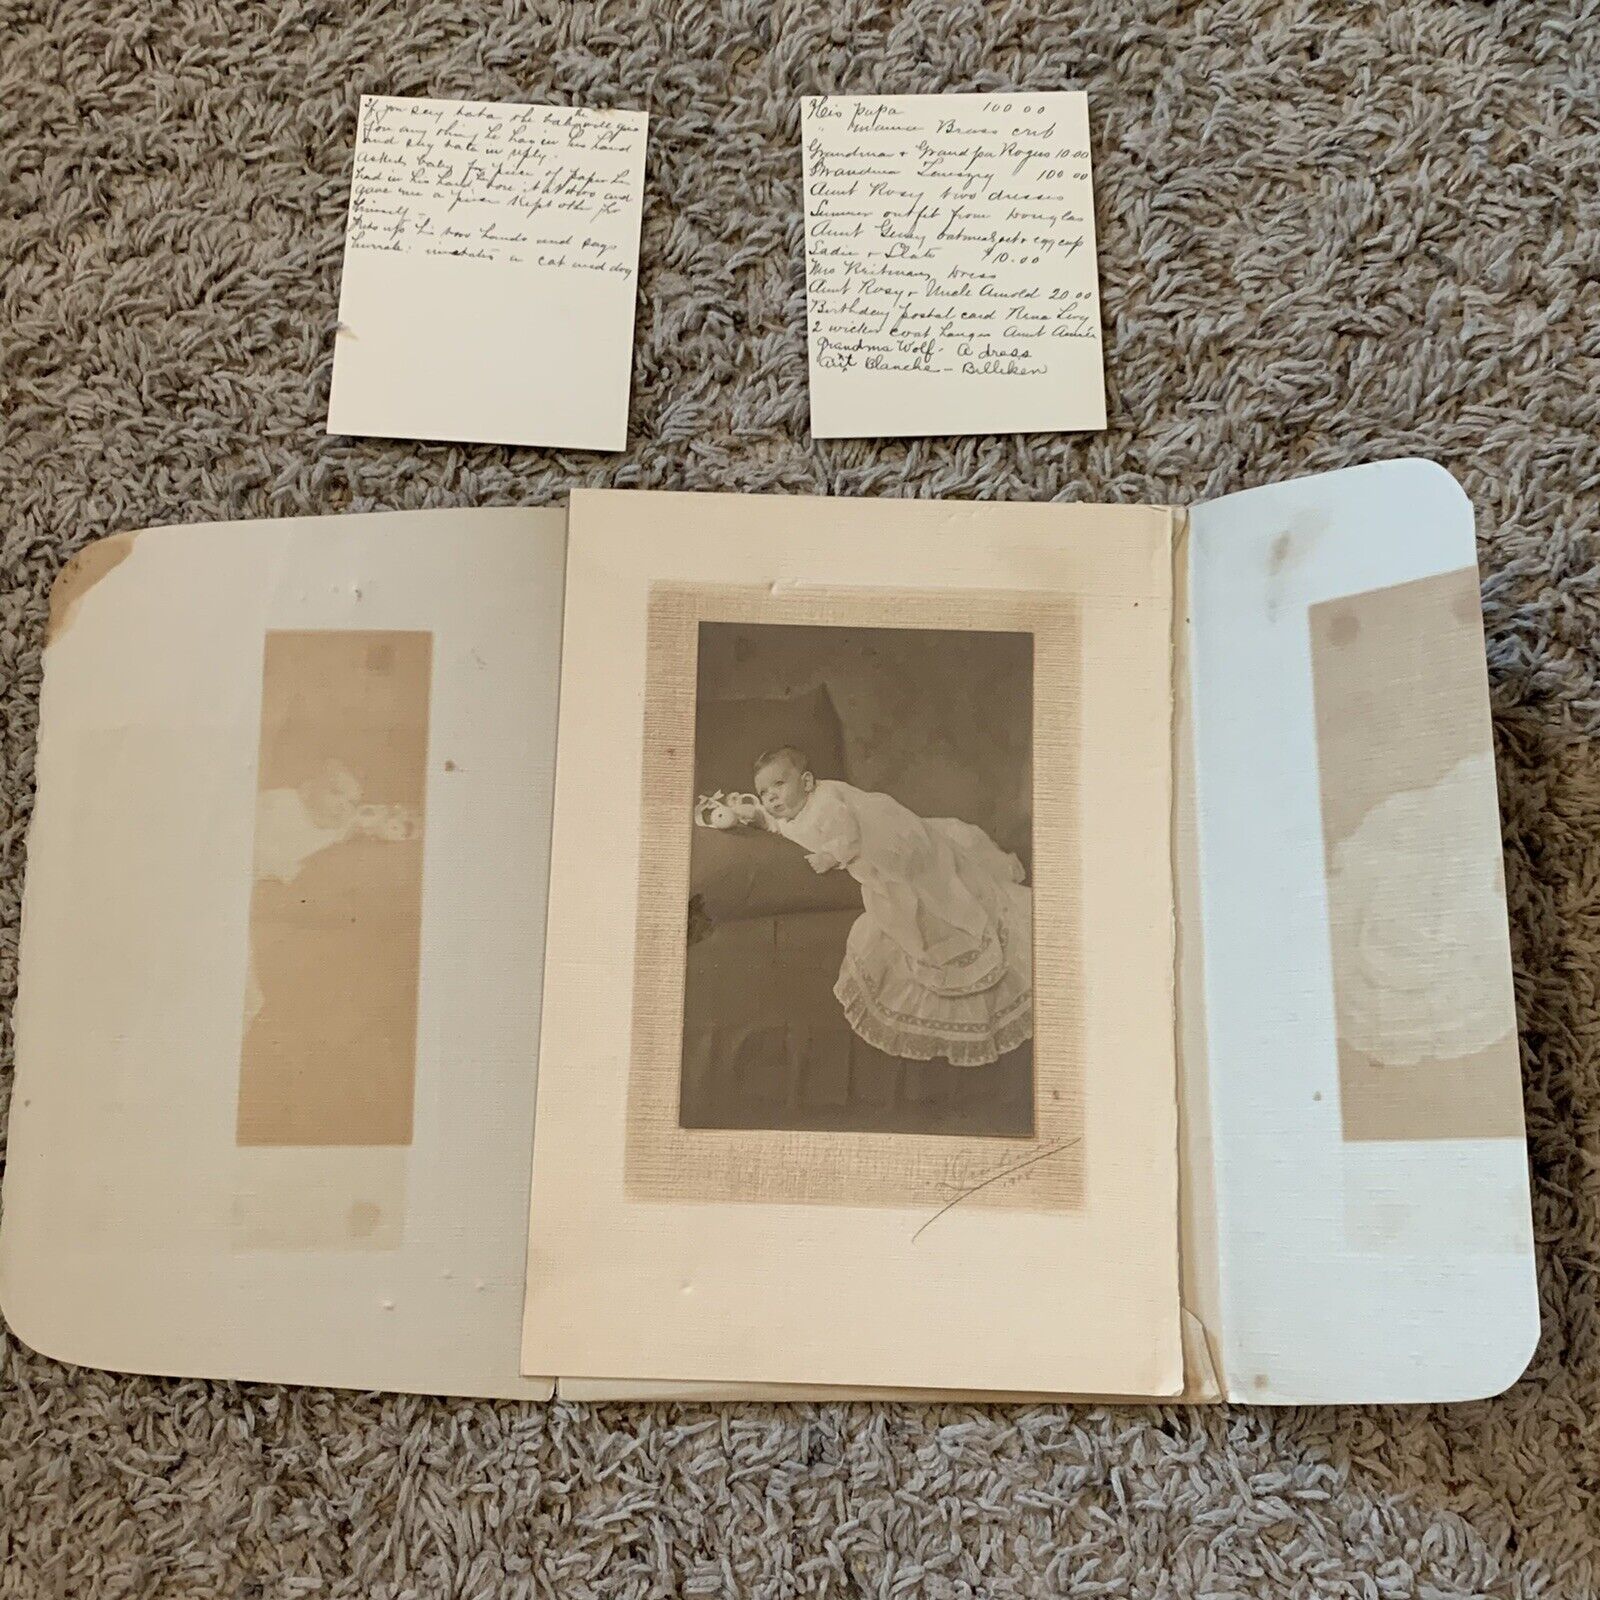 1908 BABY PHOTOGRAPH BLACK & WHITE IN ENVELOPE WITH NOTES, L. GRUBMAN NEW YORK